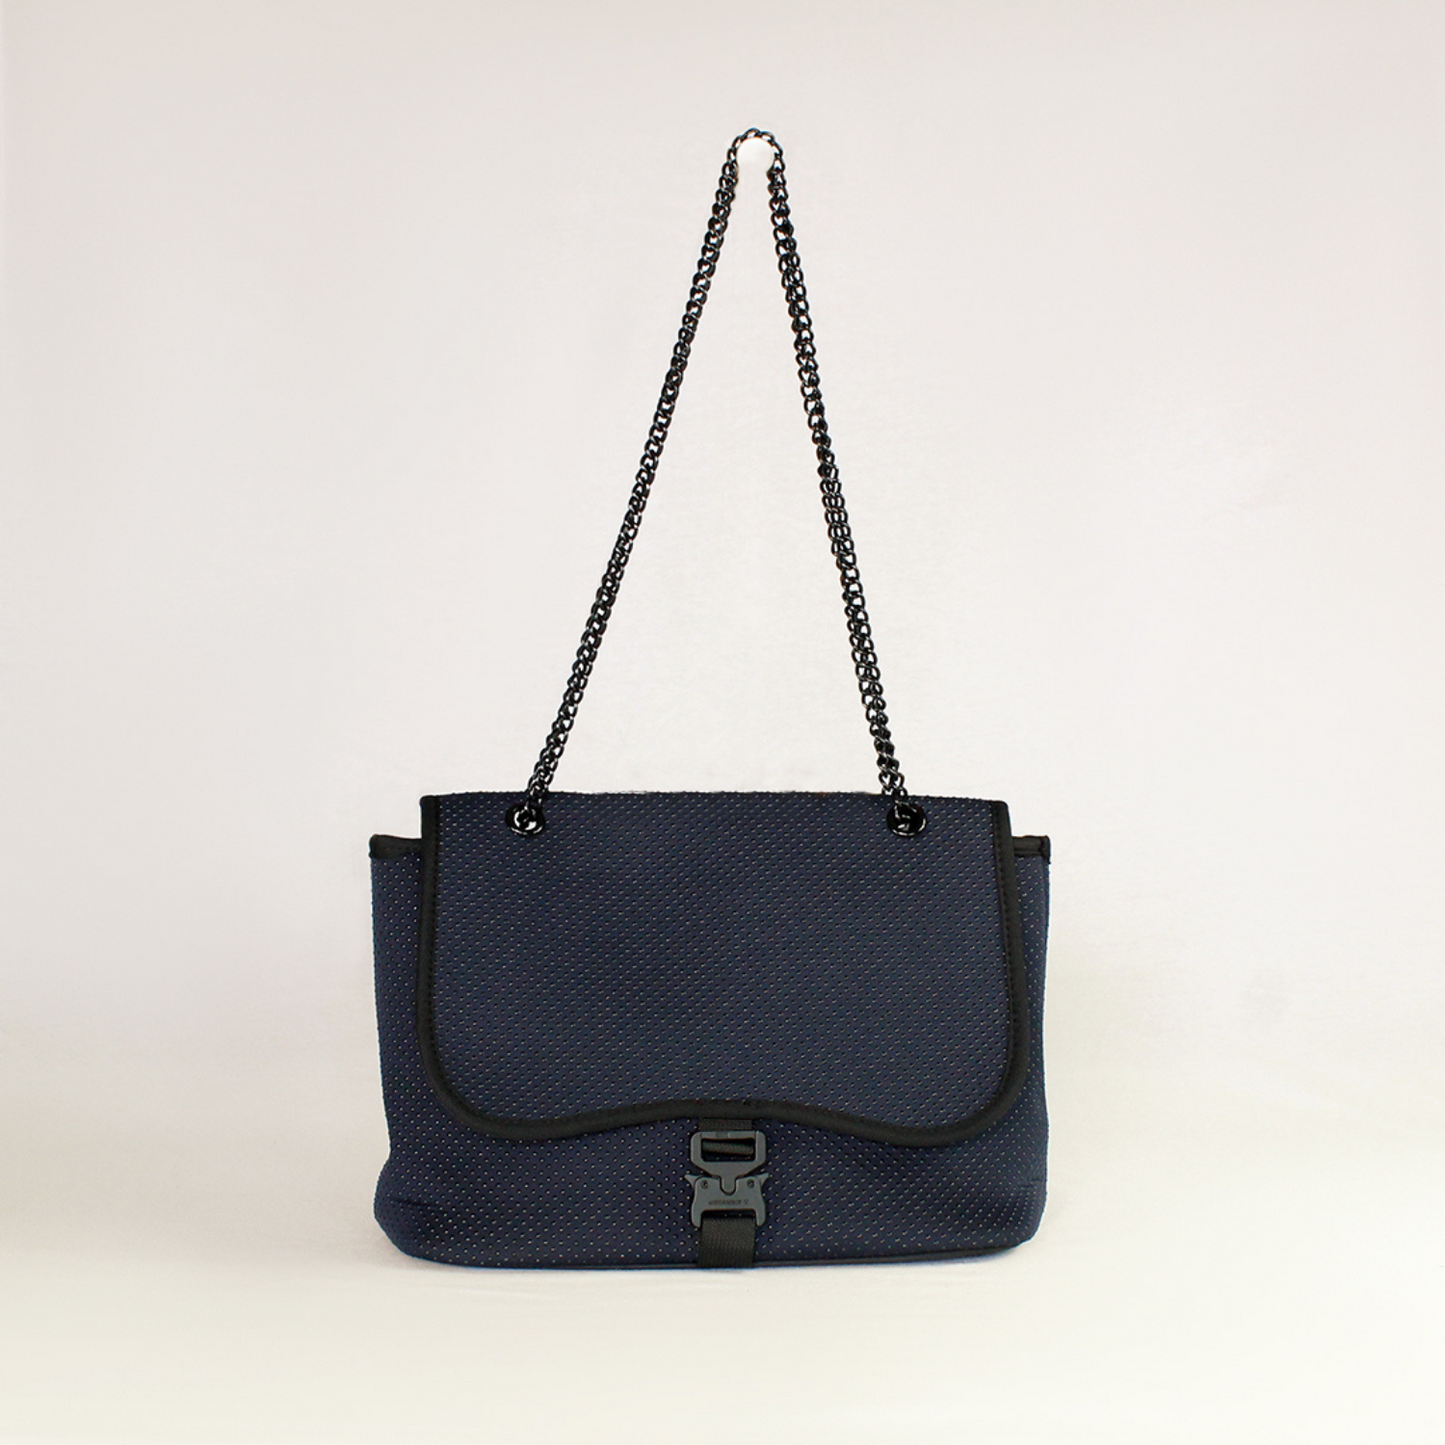 ICON TOTE + FLAP CROSSBODY + POUCH - DEEP BLUE